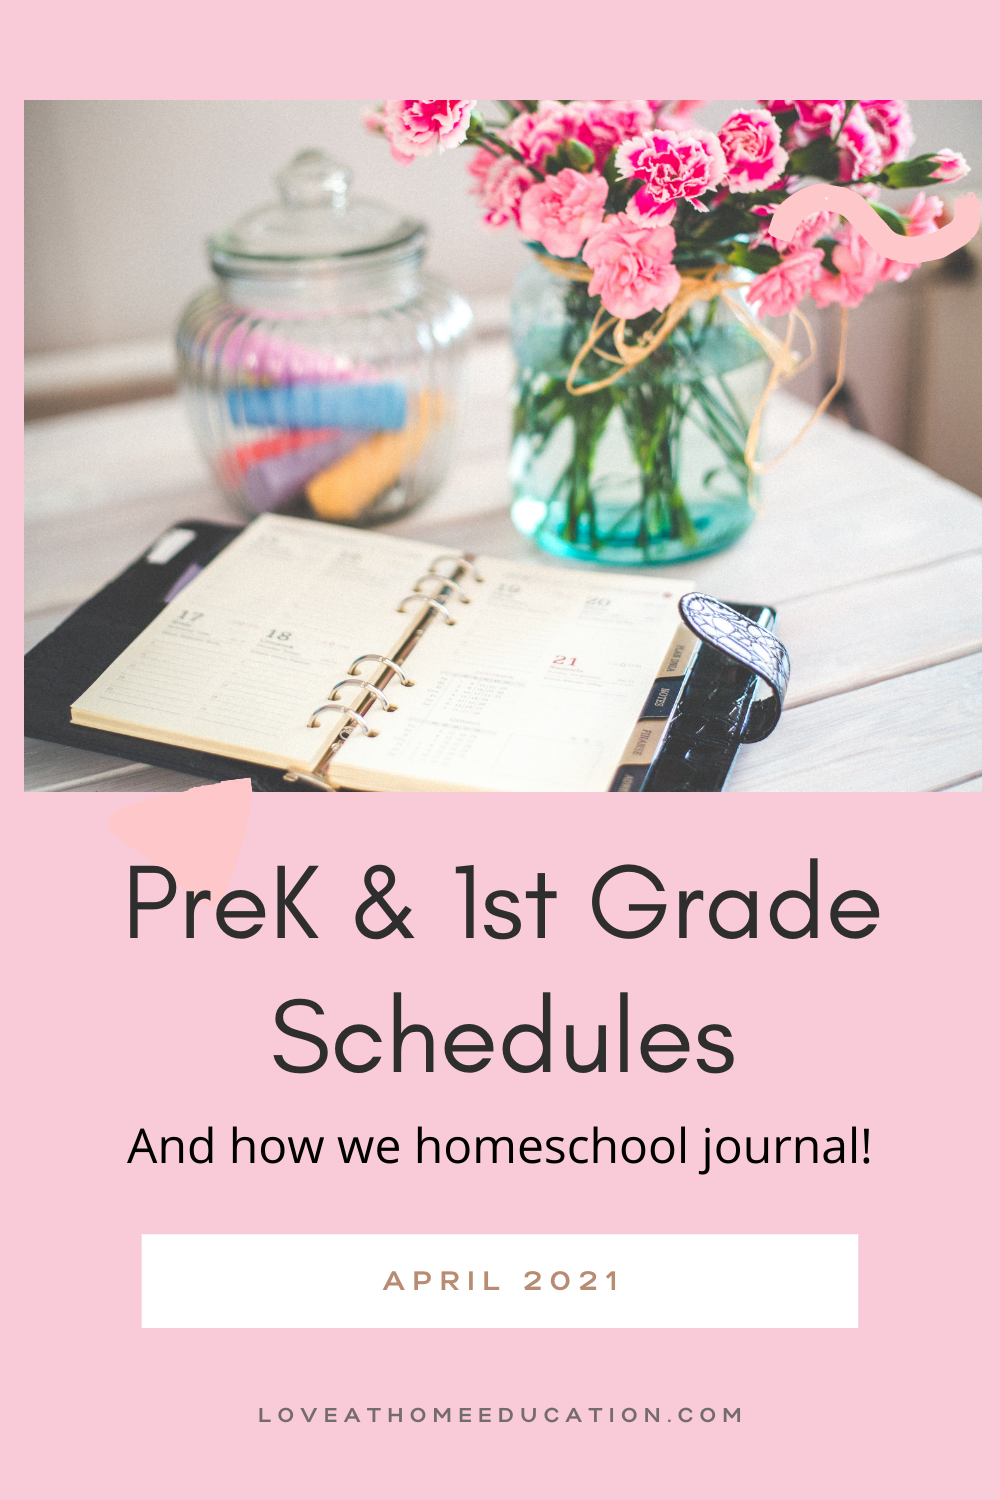 PreK & 1st Grade- A Look Back on Our Schedules & How We Keep a Homeschool Journal